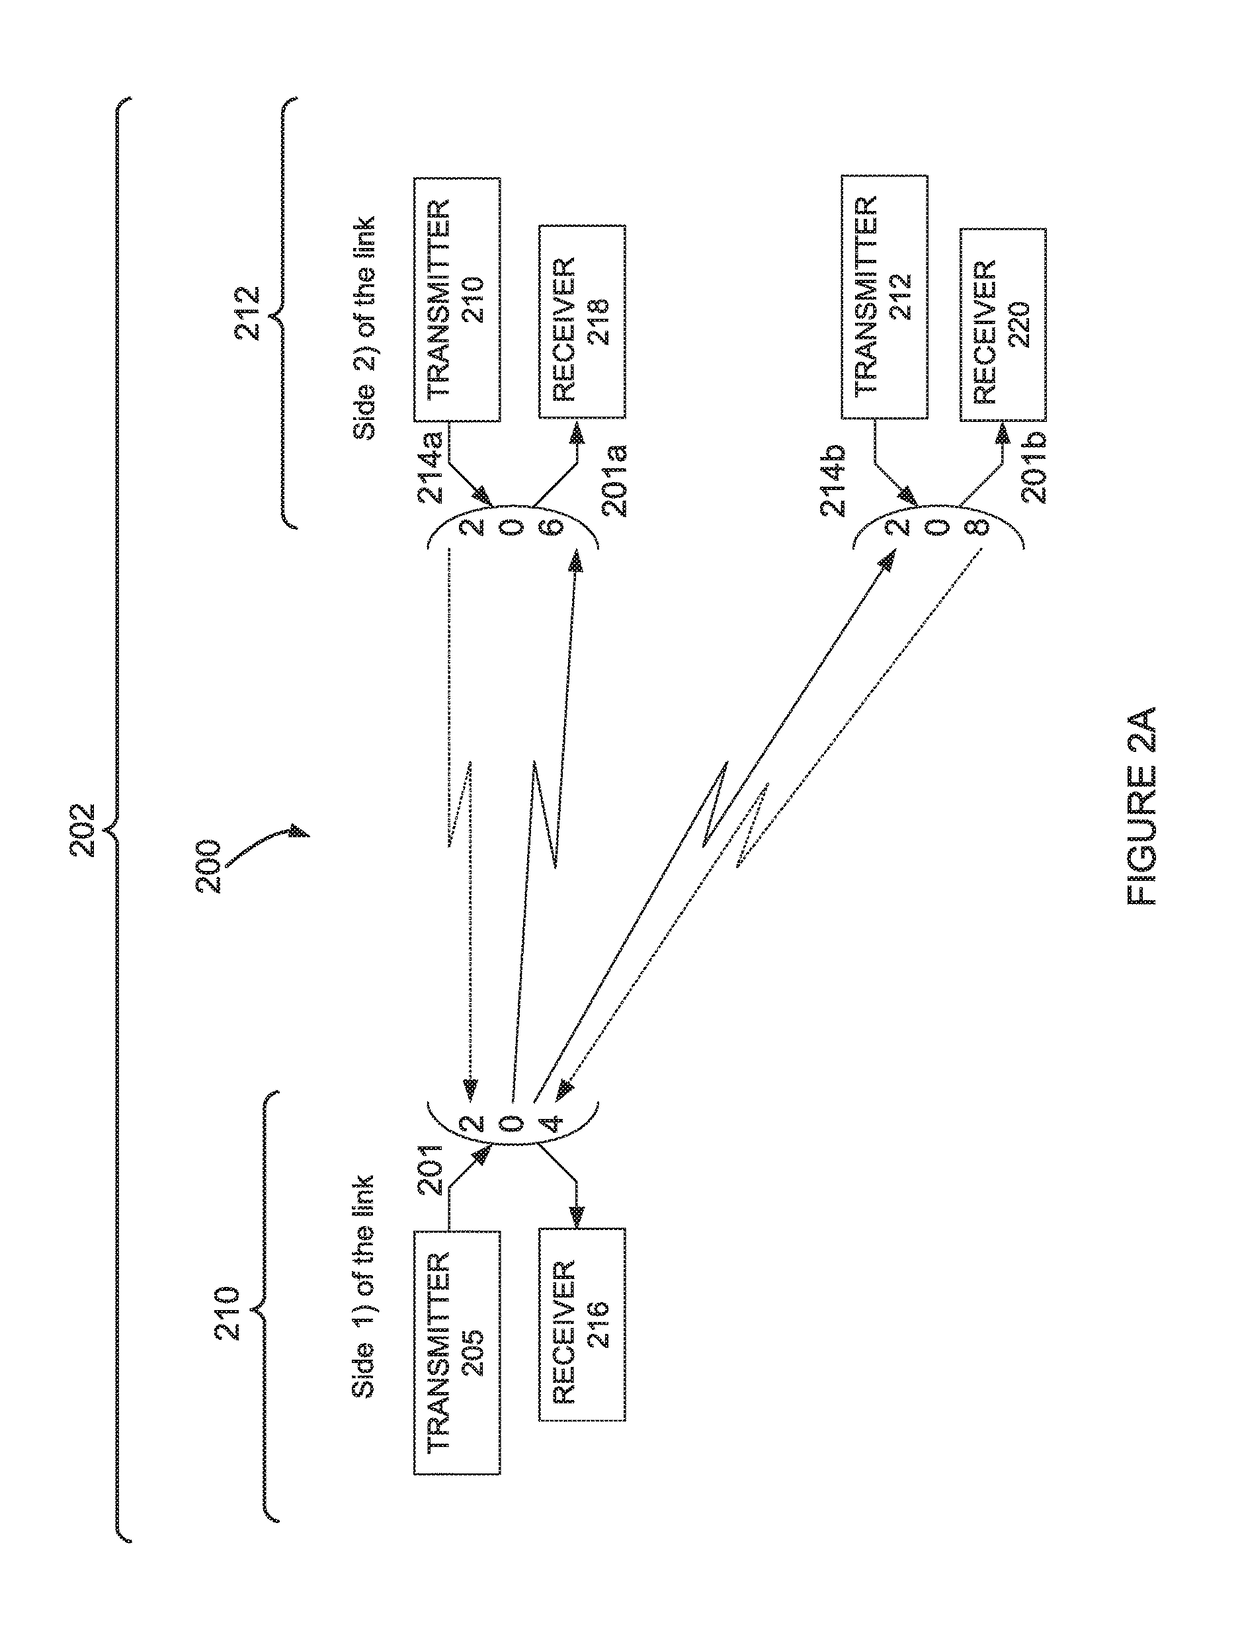 Transmit diversity and receive diversity for single carrier modulation